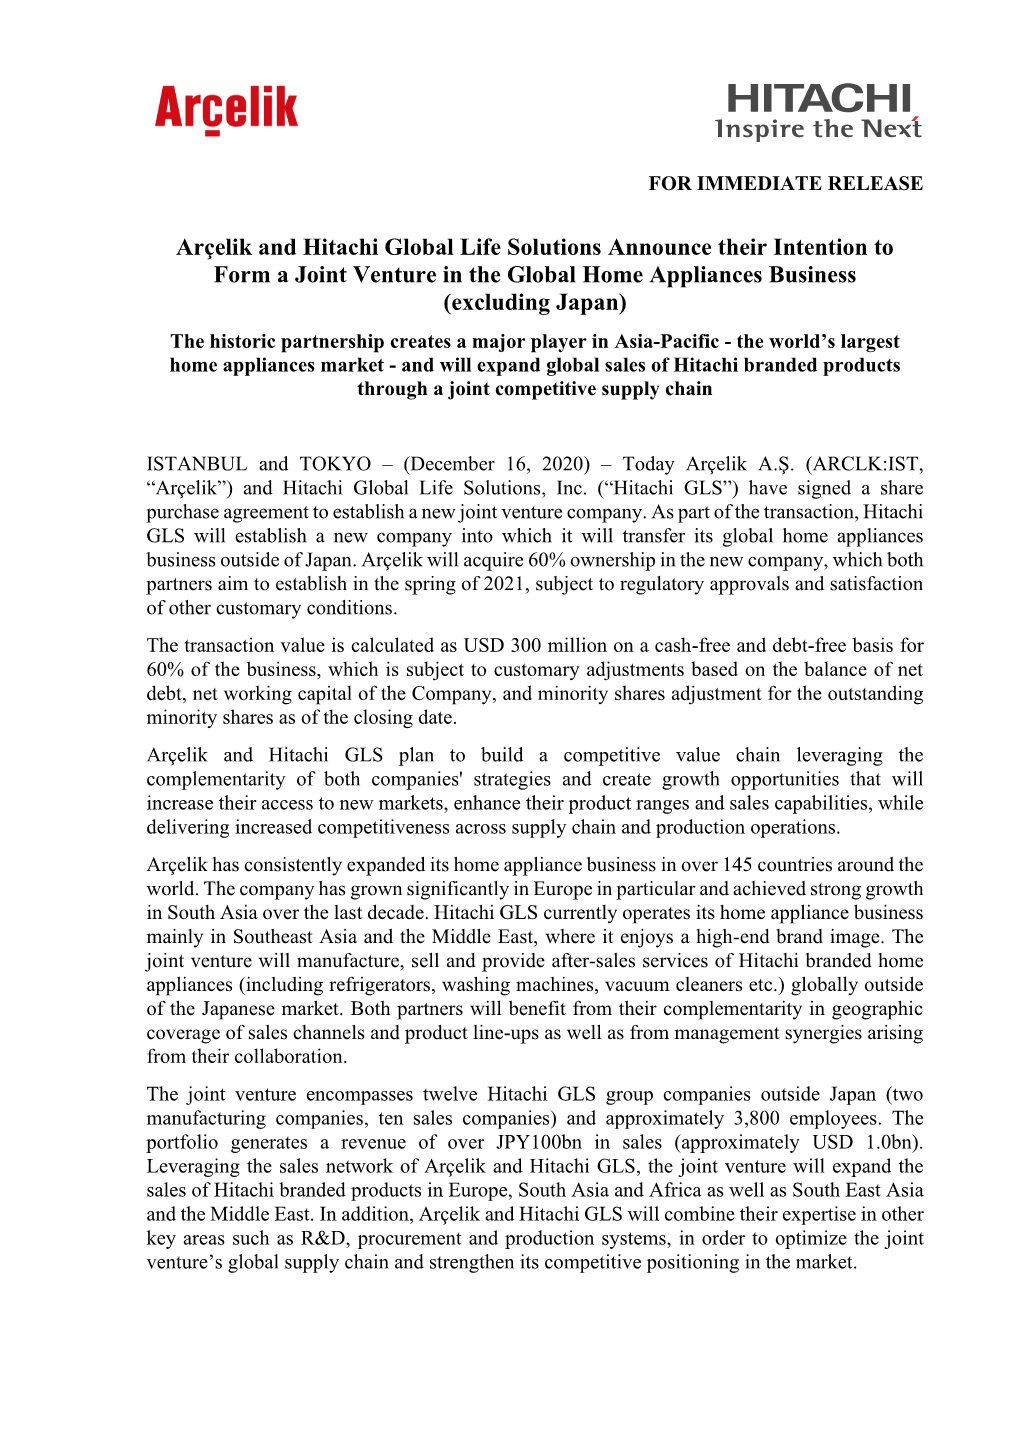 Arçelik and Hitachi Global Life Solutions Announce Their Intention to Form a Joint Venture in the Global Home Appliances Busine